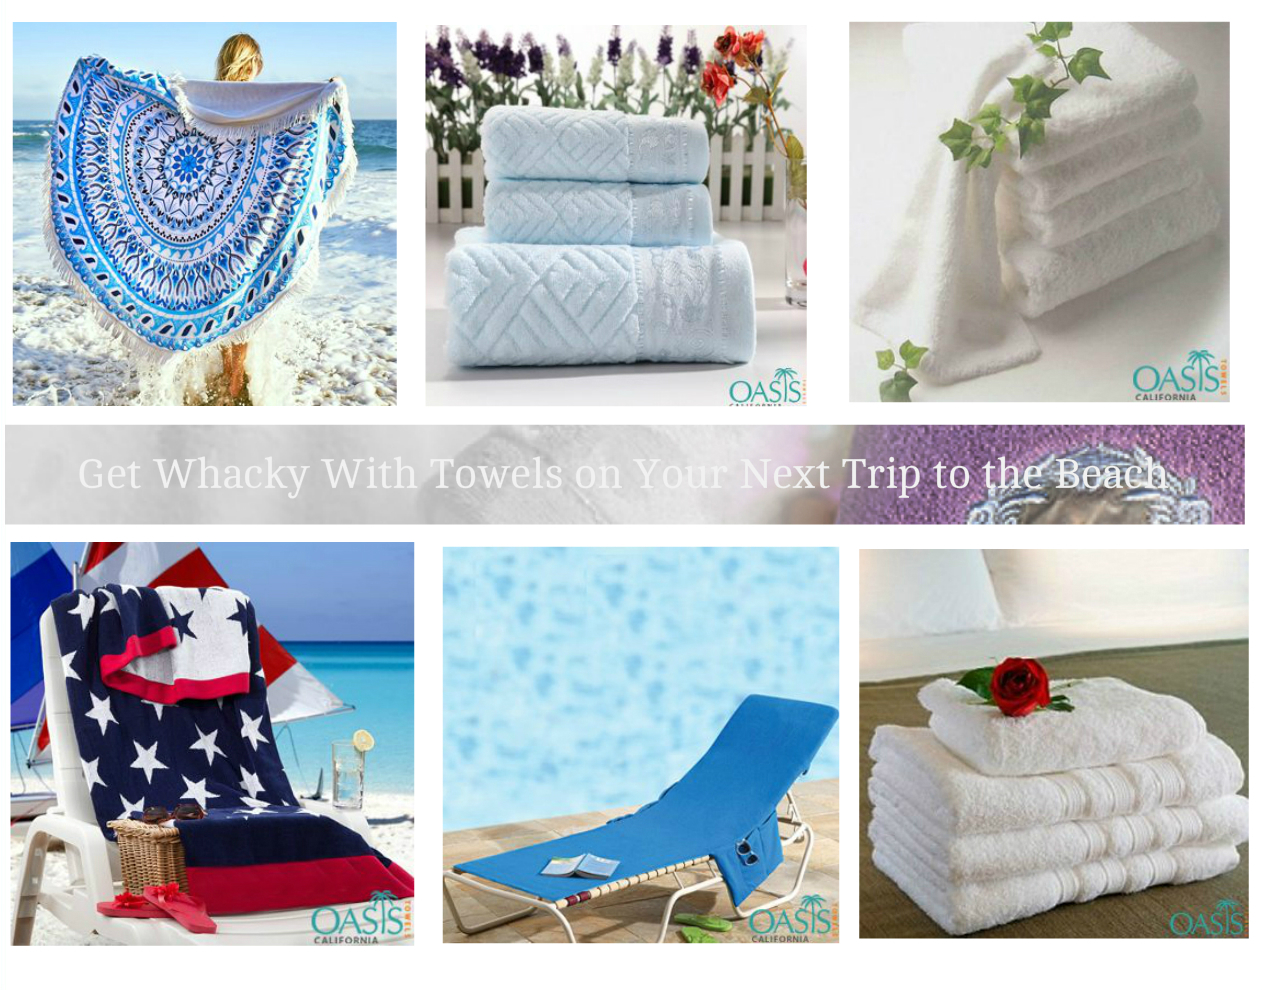 Get Whacky With Towels on Your Next Trip to the Beach